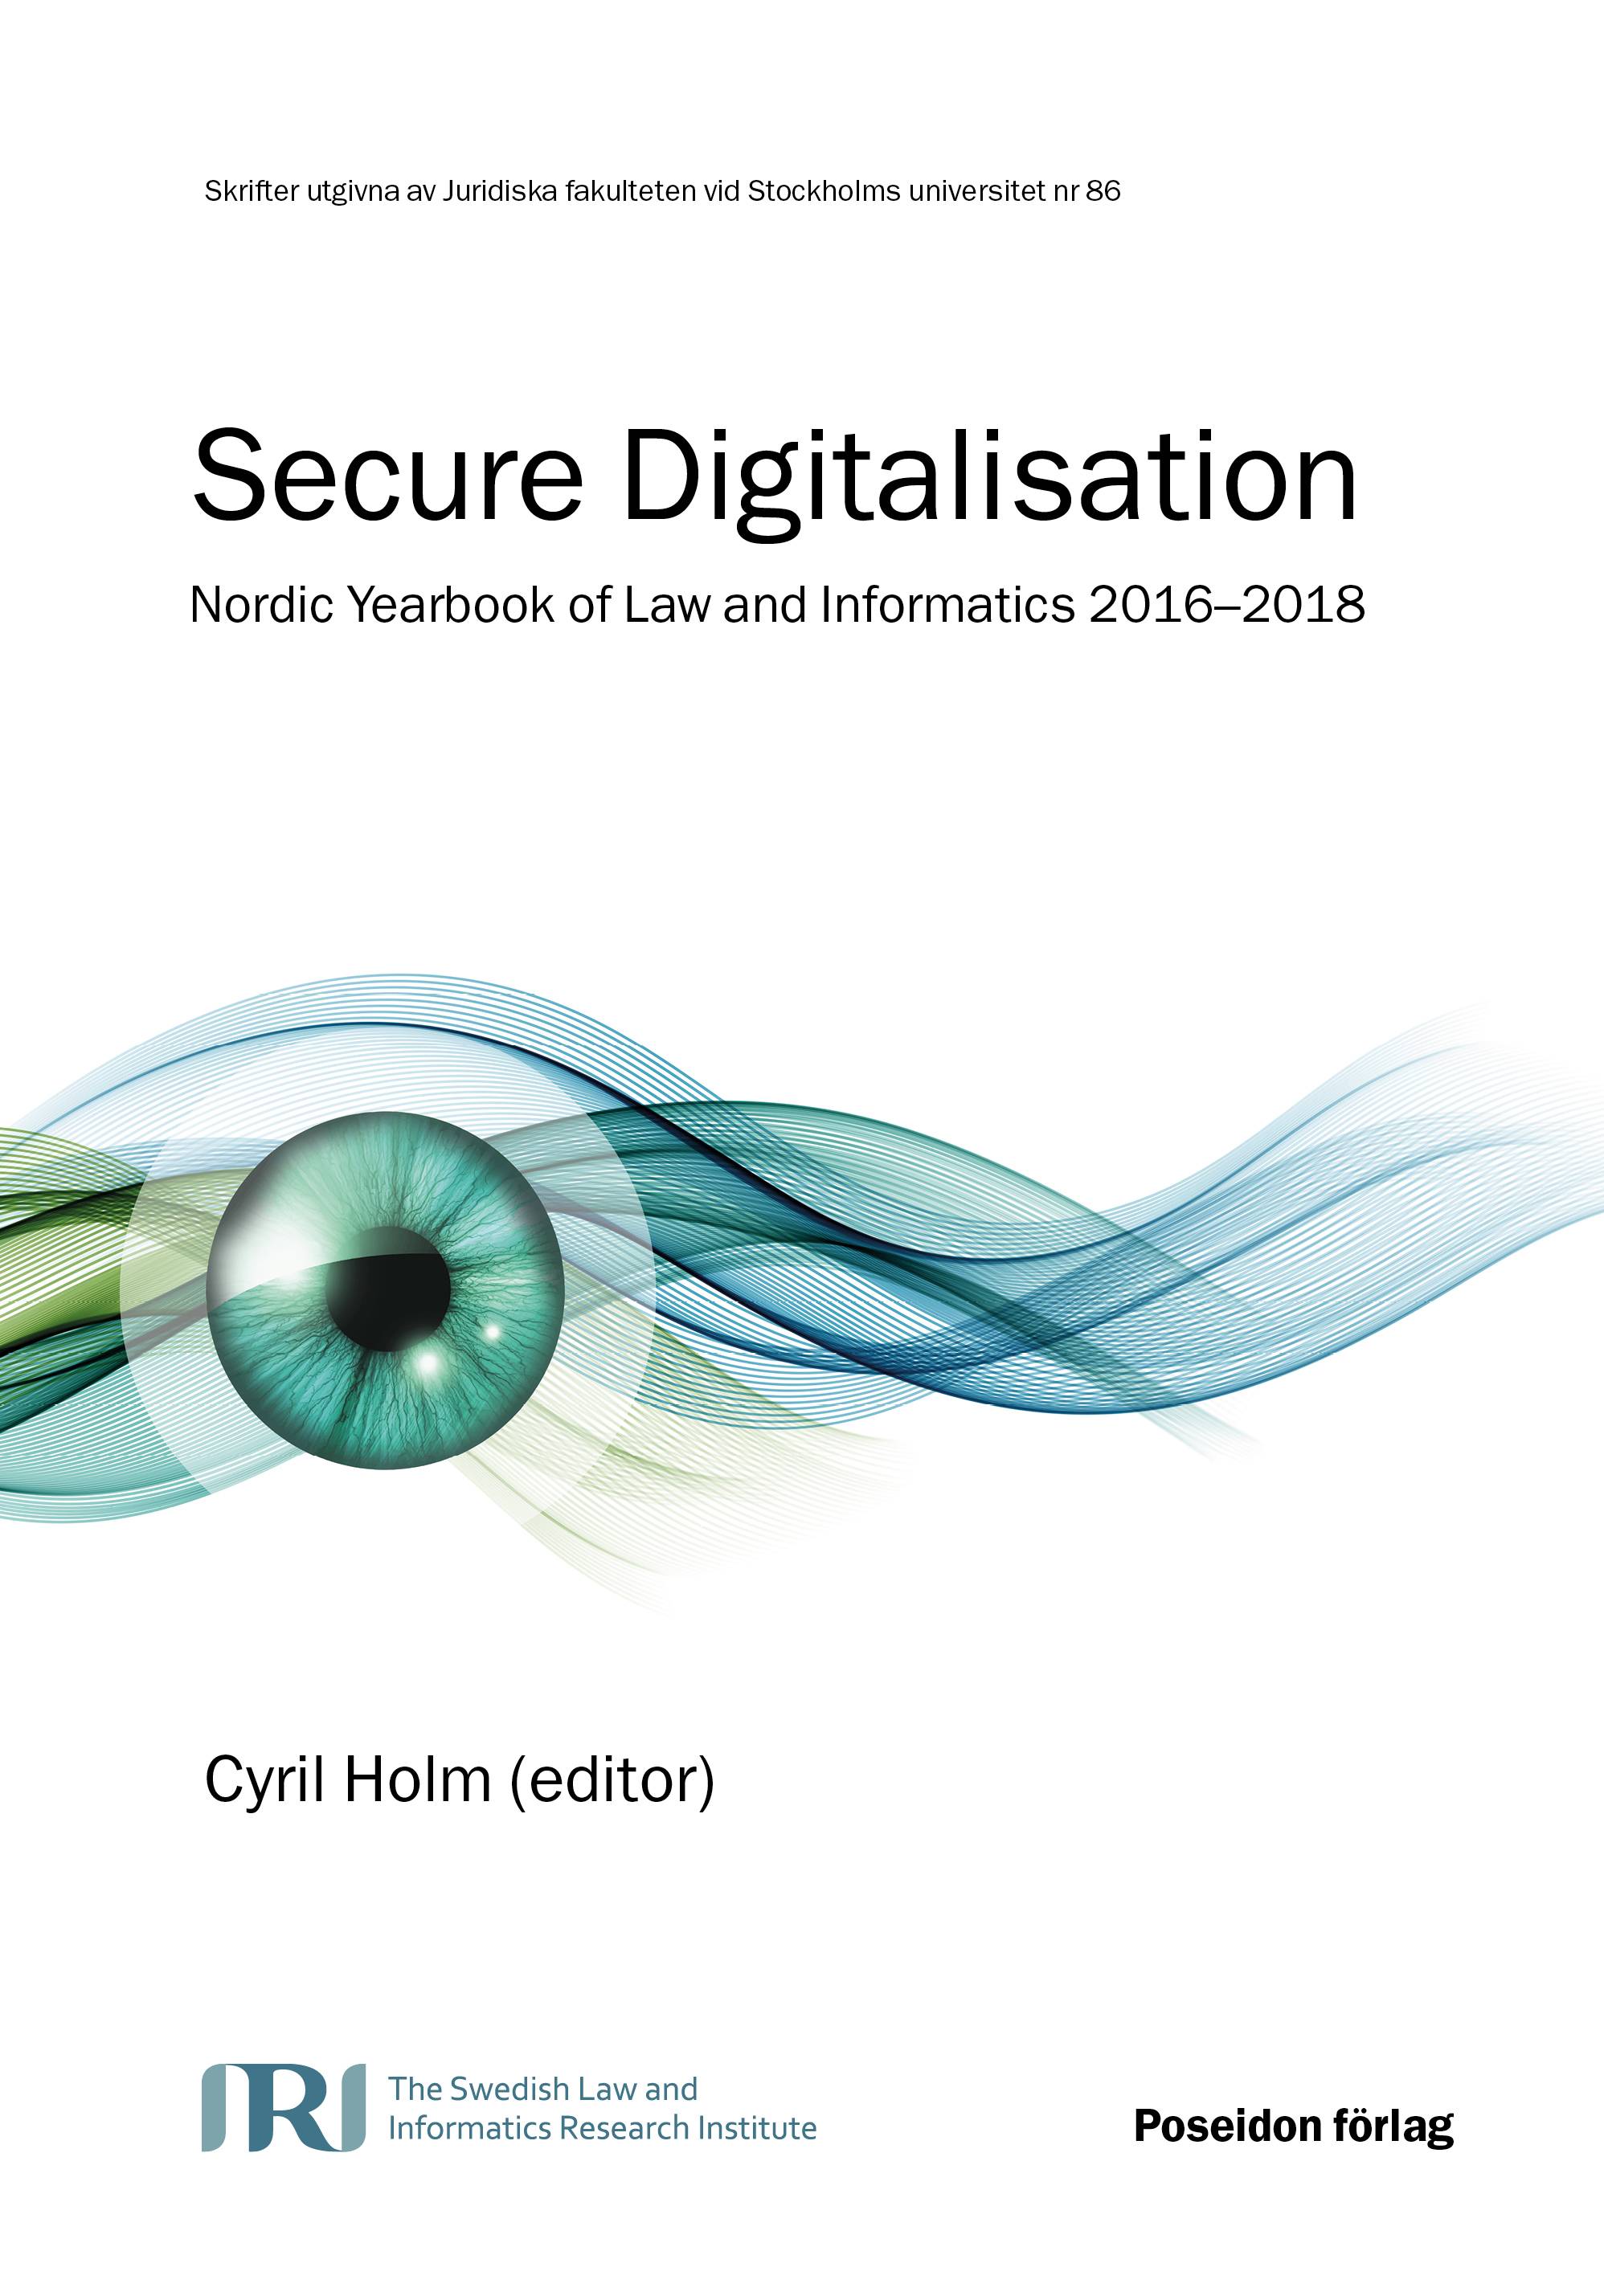 Secure Digitilisation – Nordic Yearbook of Law and Informatics 2016–2018